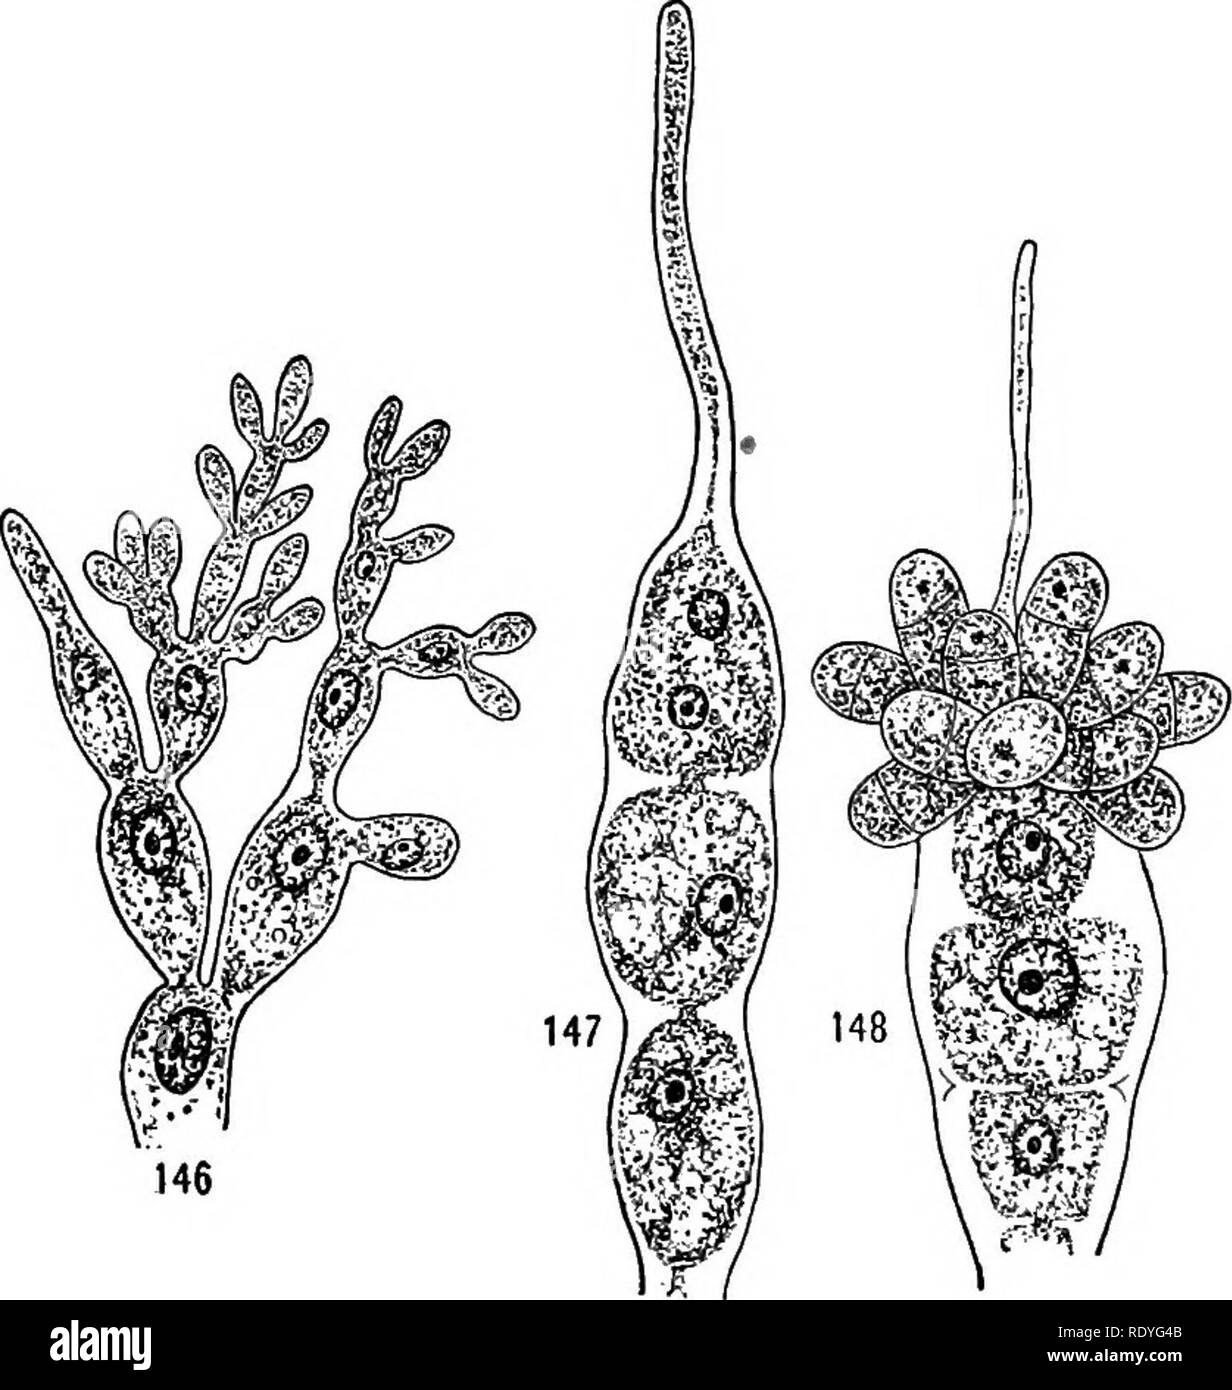 . A textbook of botany for colleges and universities ... Botany. 56 MORPHOLOGY Nemalion. — This marine form will serve to illustrate the simpler red algae. It is a branching filament, and probably produces no tetra- spores. Anlheridia. —The antheridia occur in clusters at the ends of short branches (fig. 146), each antheridium being a single cell, which at first contains a single nucleus. This nucleus divides, so that the protoplast of the mature antheridium contains two male nuclei. Physiologically, therefore, the an- theridium contains two sperms, but they are not organ- ized as morpho- logi Stock Photo